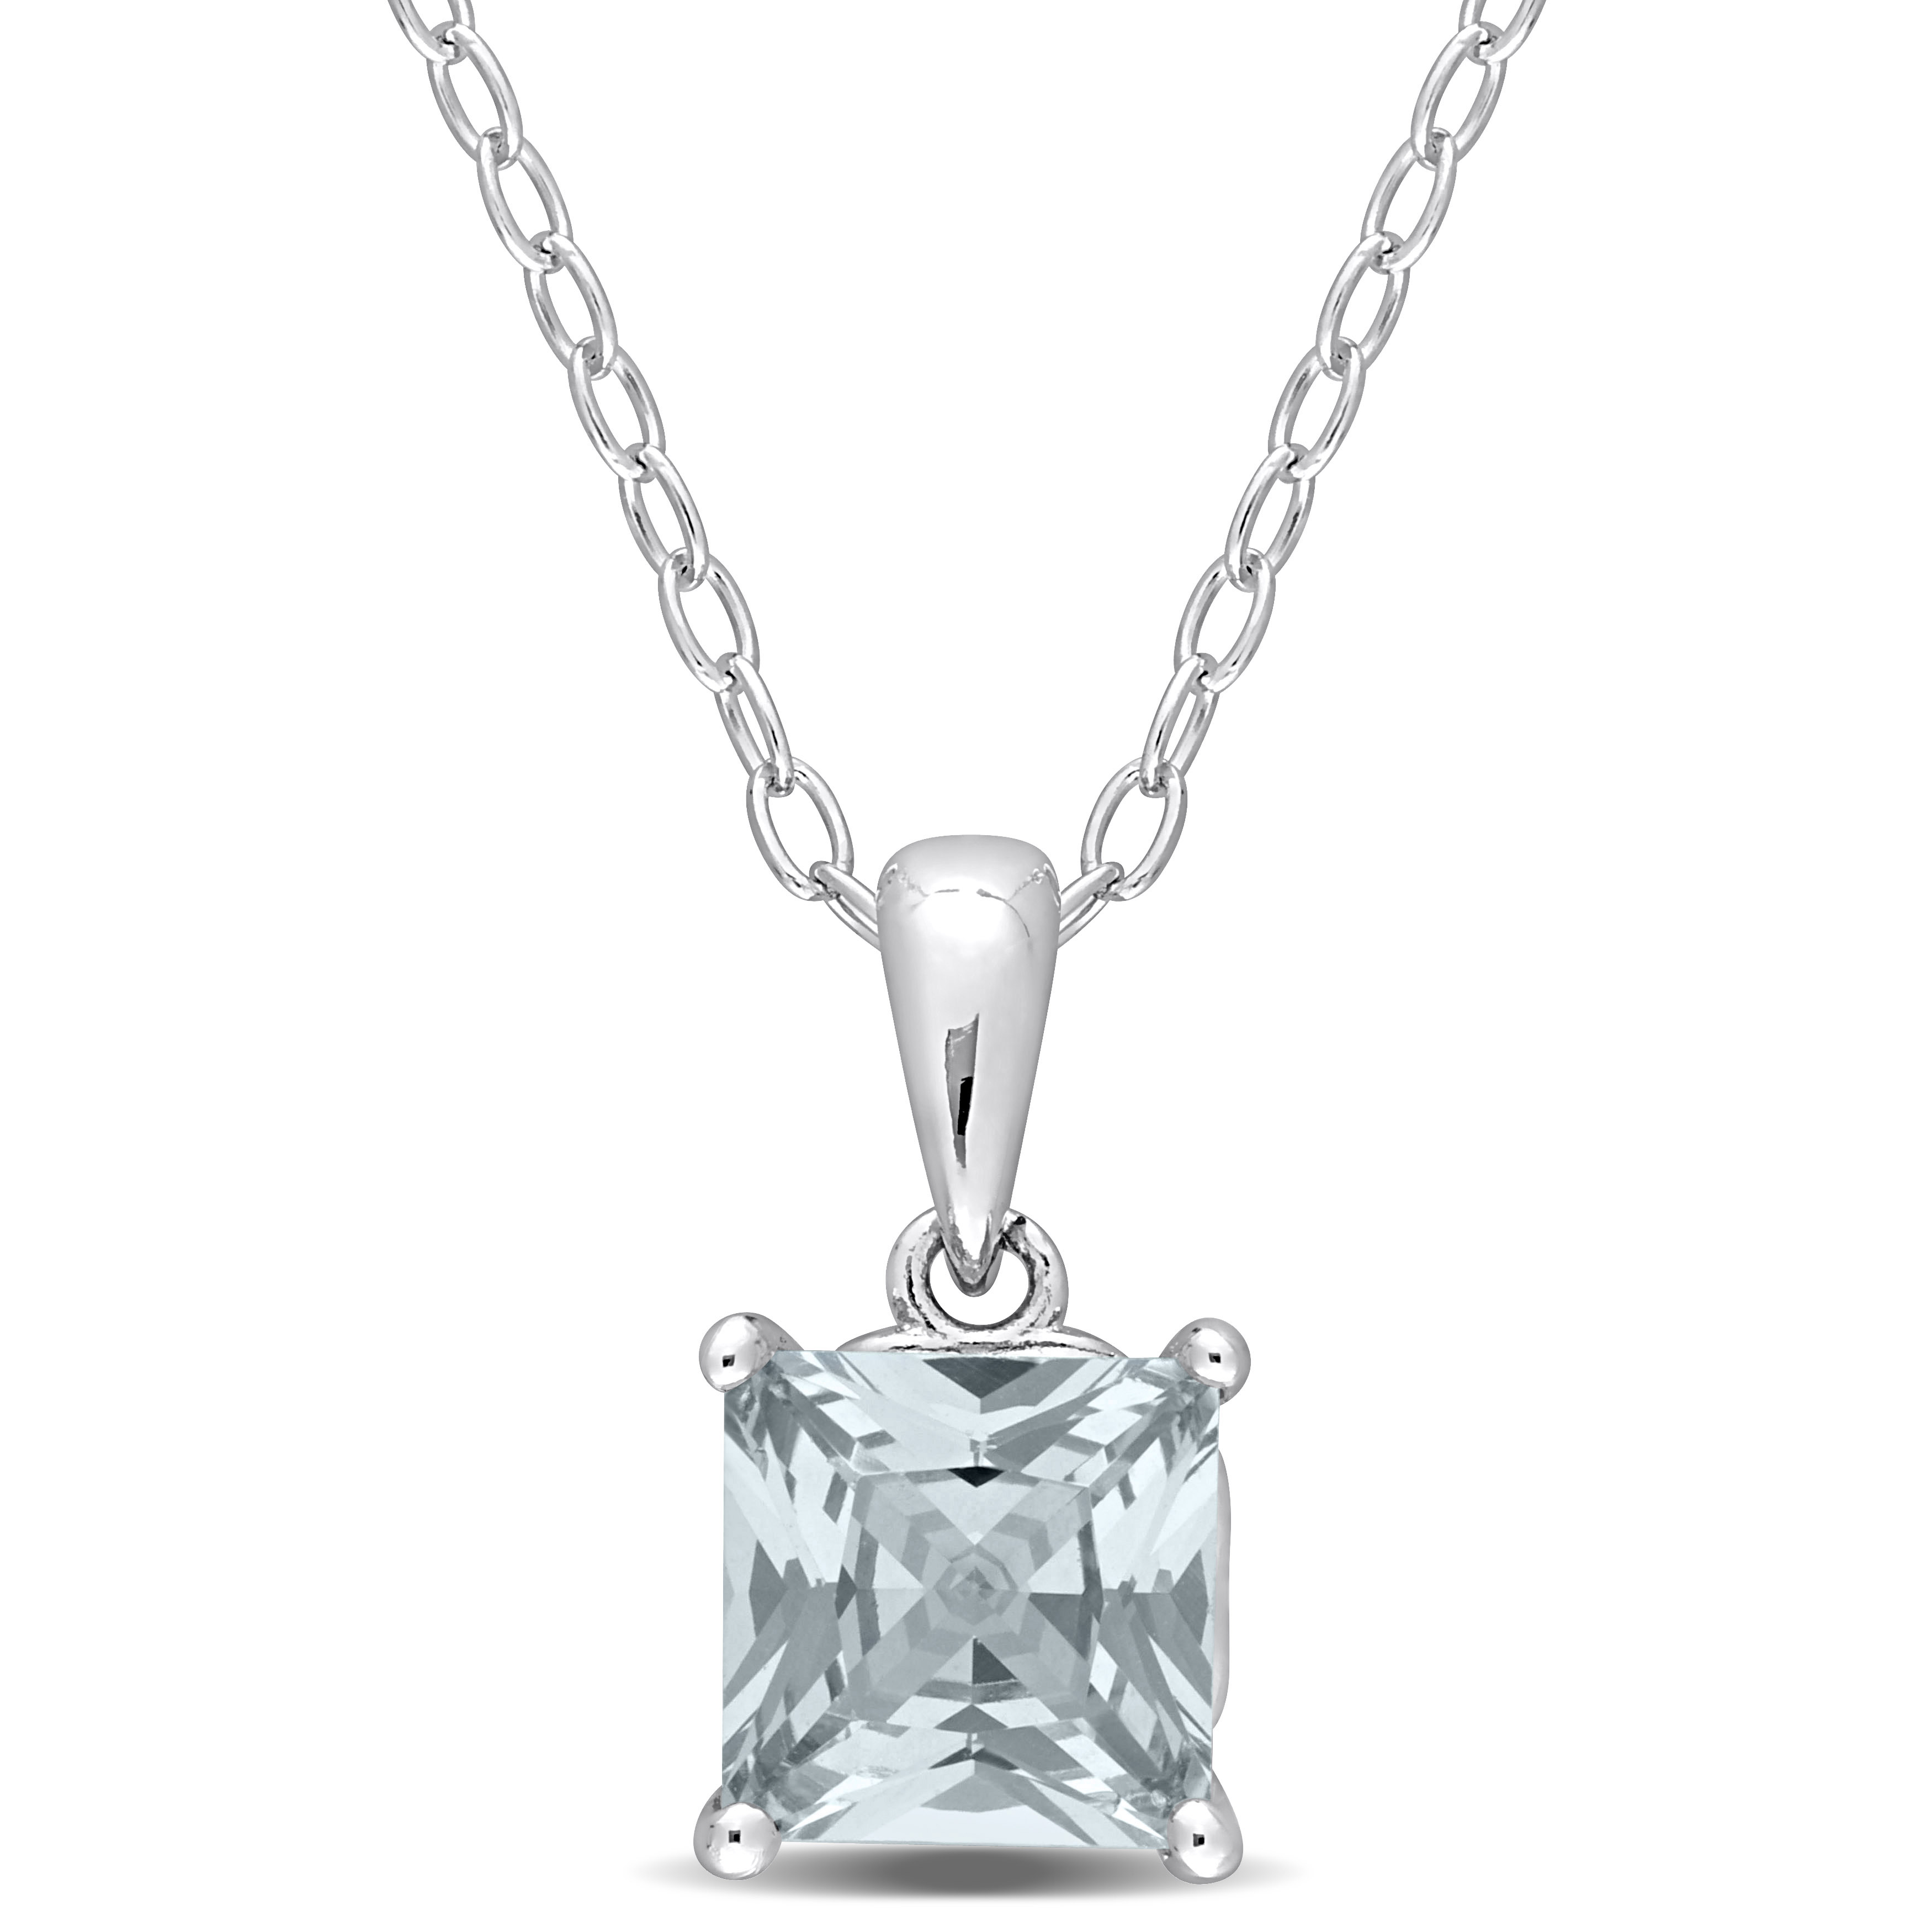 1 CT TGW Princess Cut Synthetic Spinel Solitaire Heart Design Pendant with Chain in Sterling Silver - 18 in.